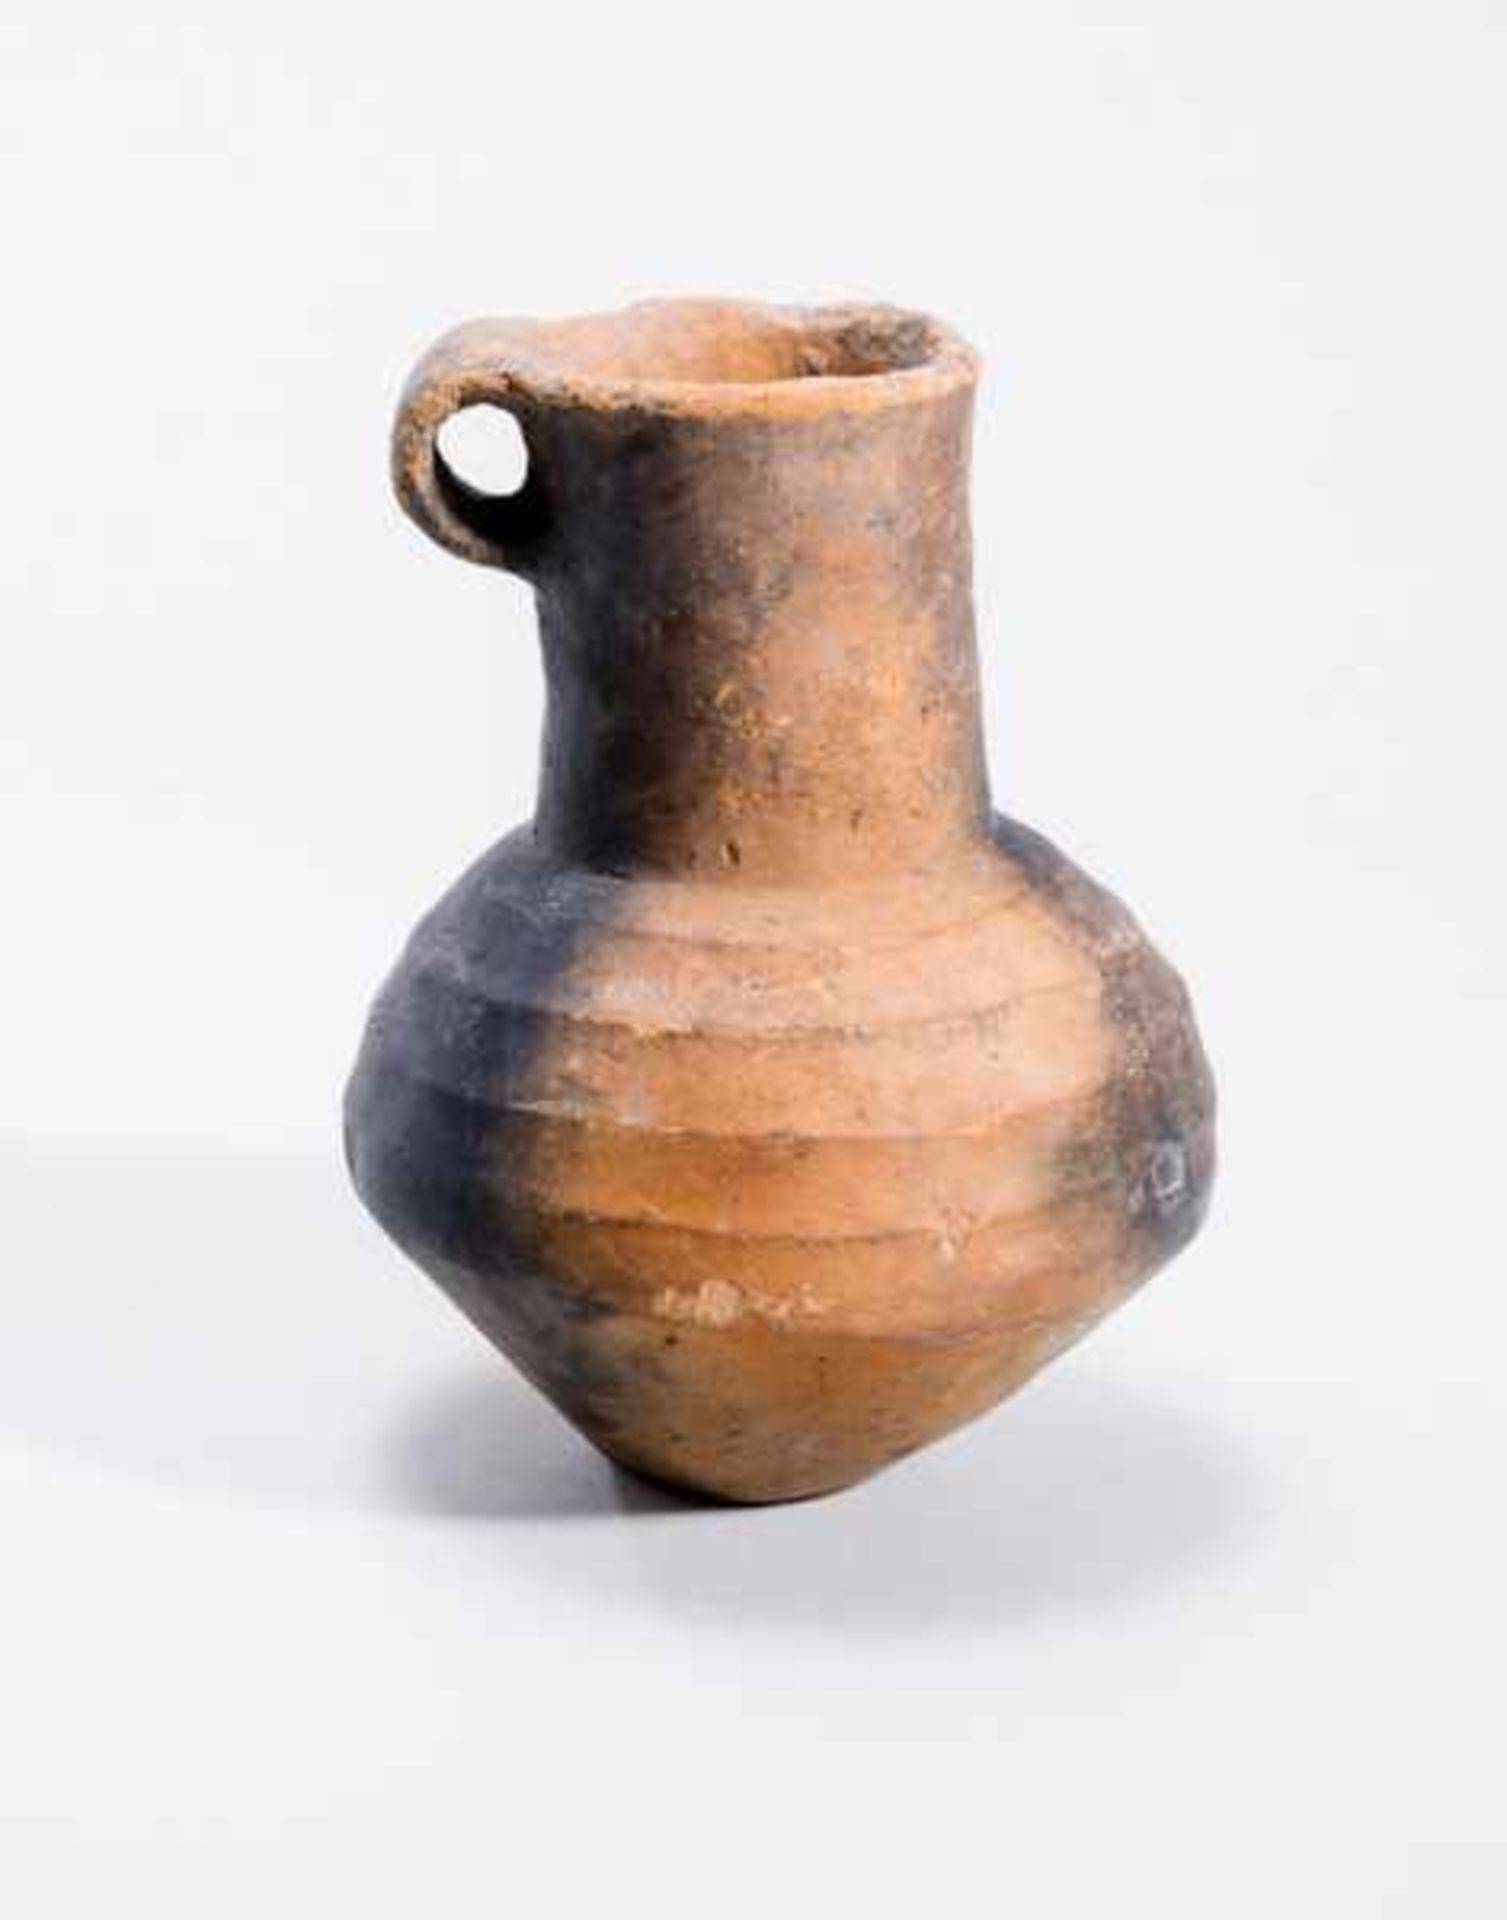 JUG Terracotta. China, Yangshao culture, Majiayao, Banshanstyle, ca. 2nd to 3rd millennium BCE - Image 2 of 5